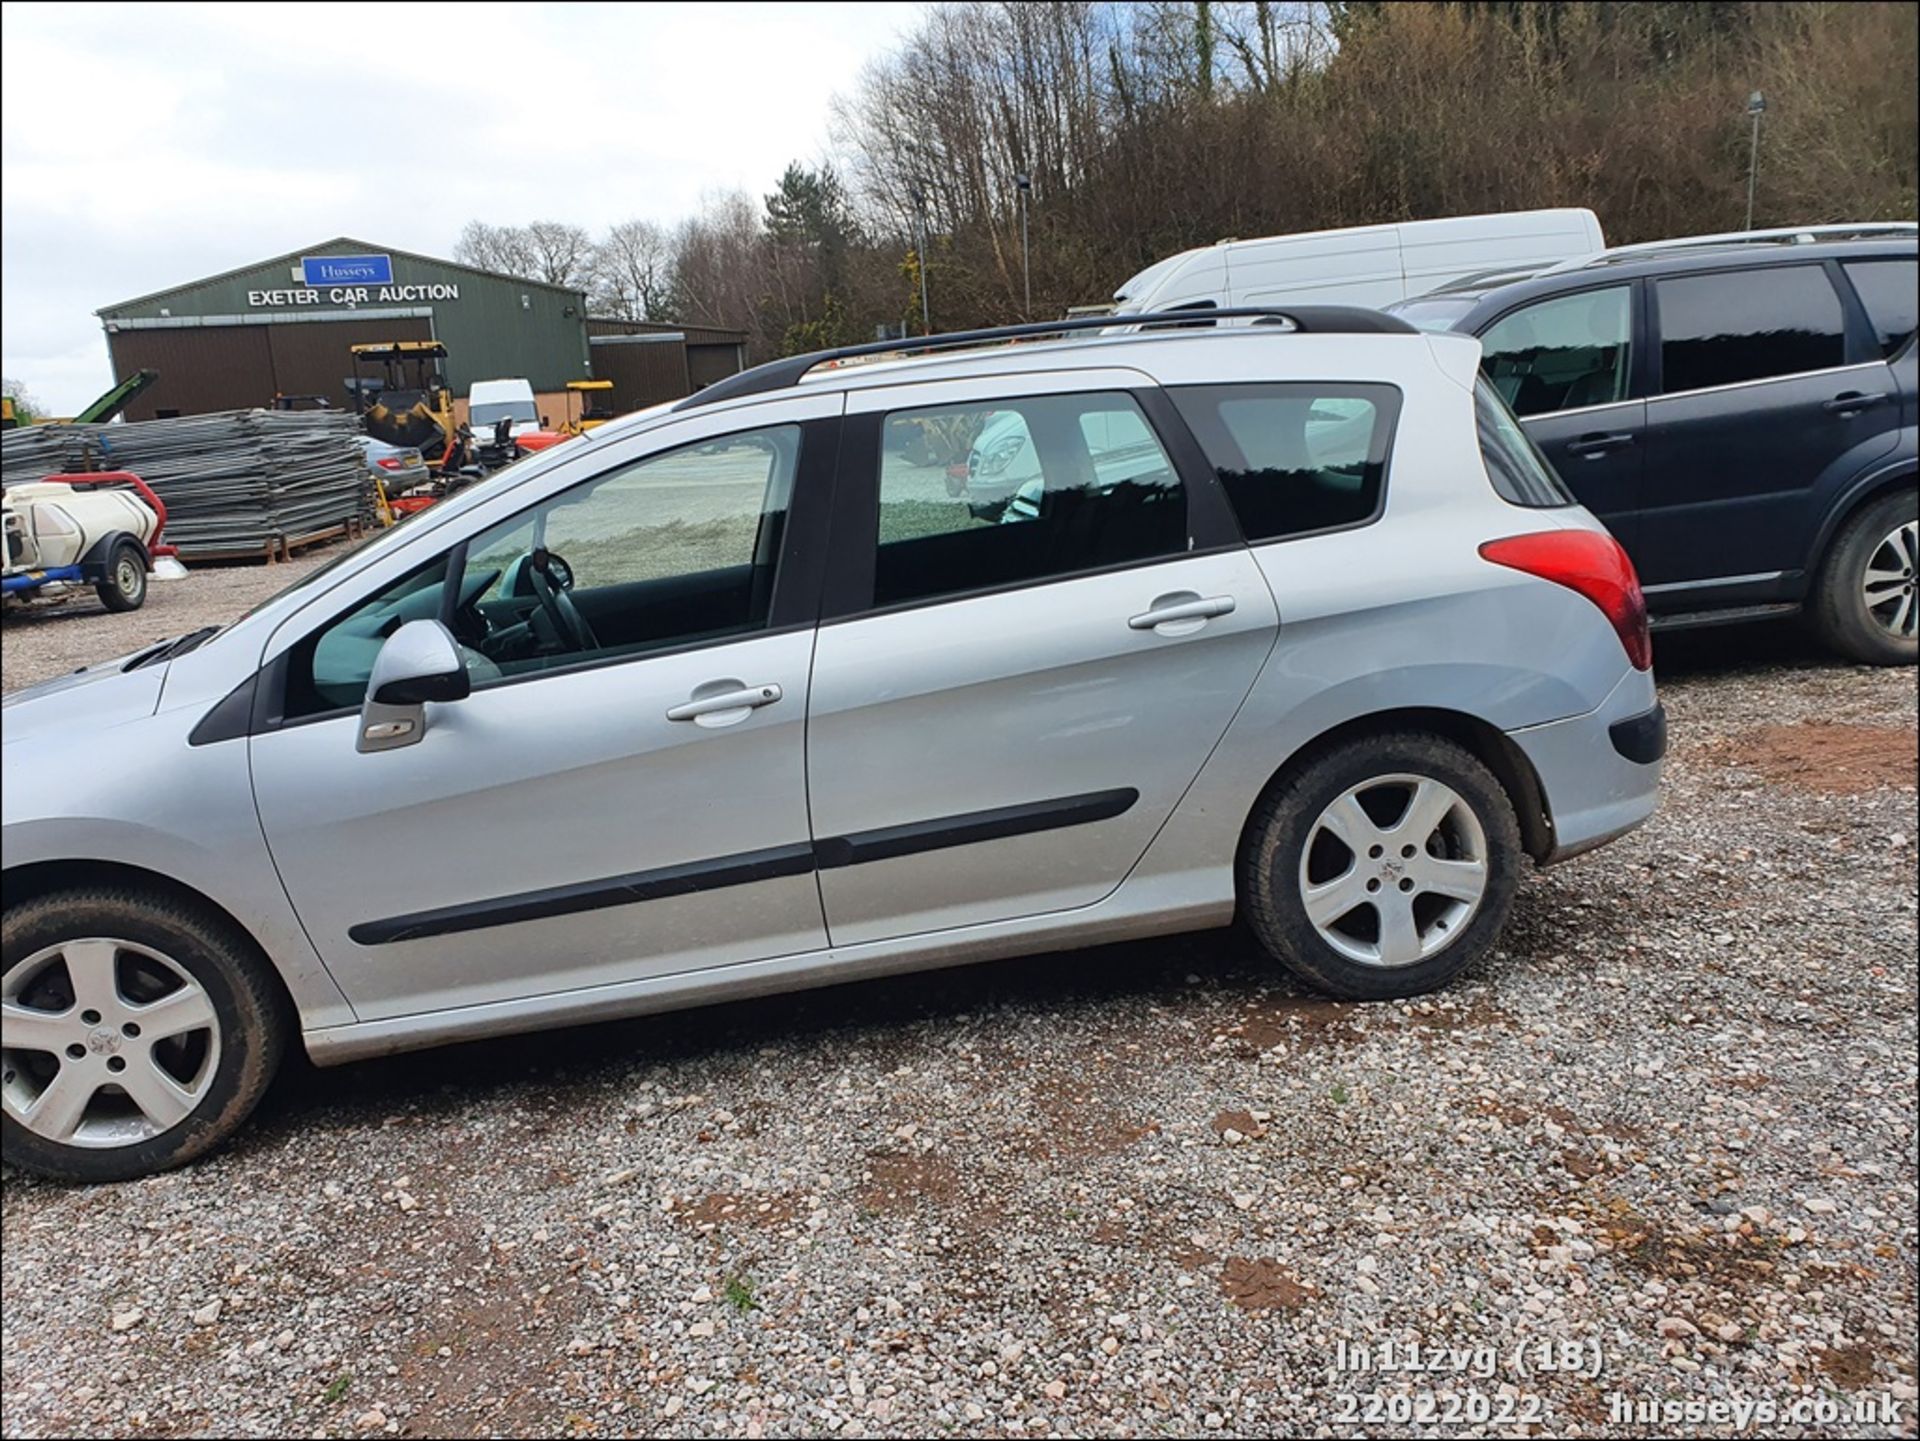 11/11 PEUGEOT 308 S SW HDI 92 - 1560cc 5dr Estate (Silver, 115k) - Image 18 of 46